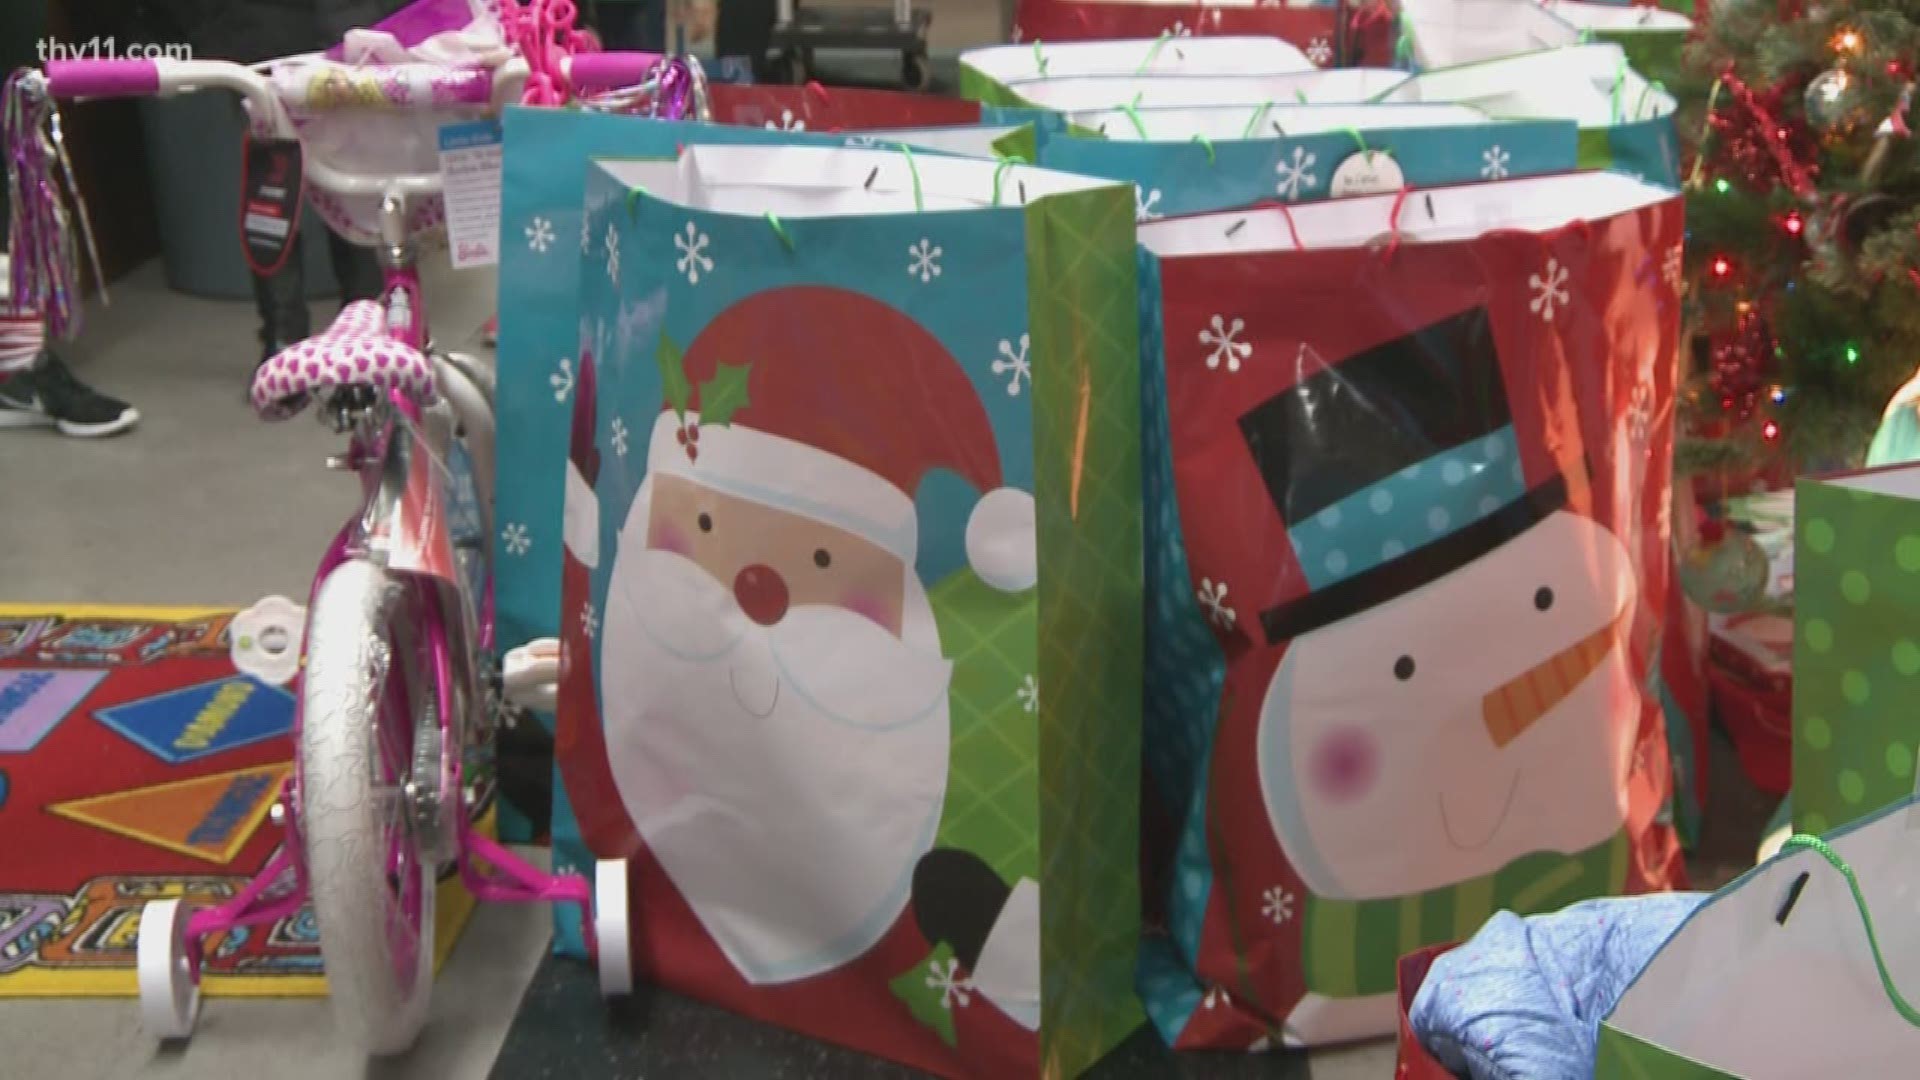 People in southwest Little Rock are pitching in to help those who need help this holiday season.